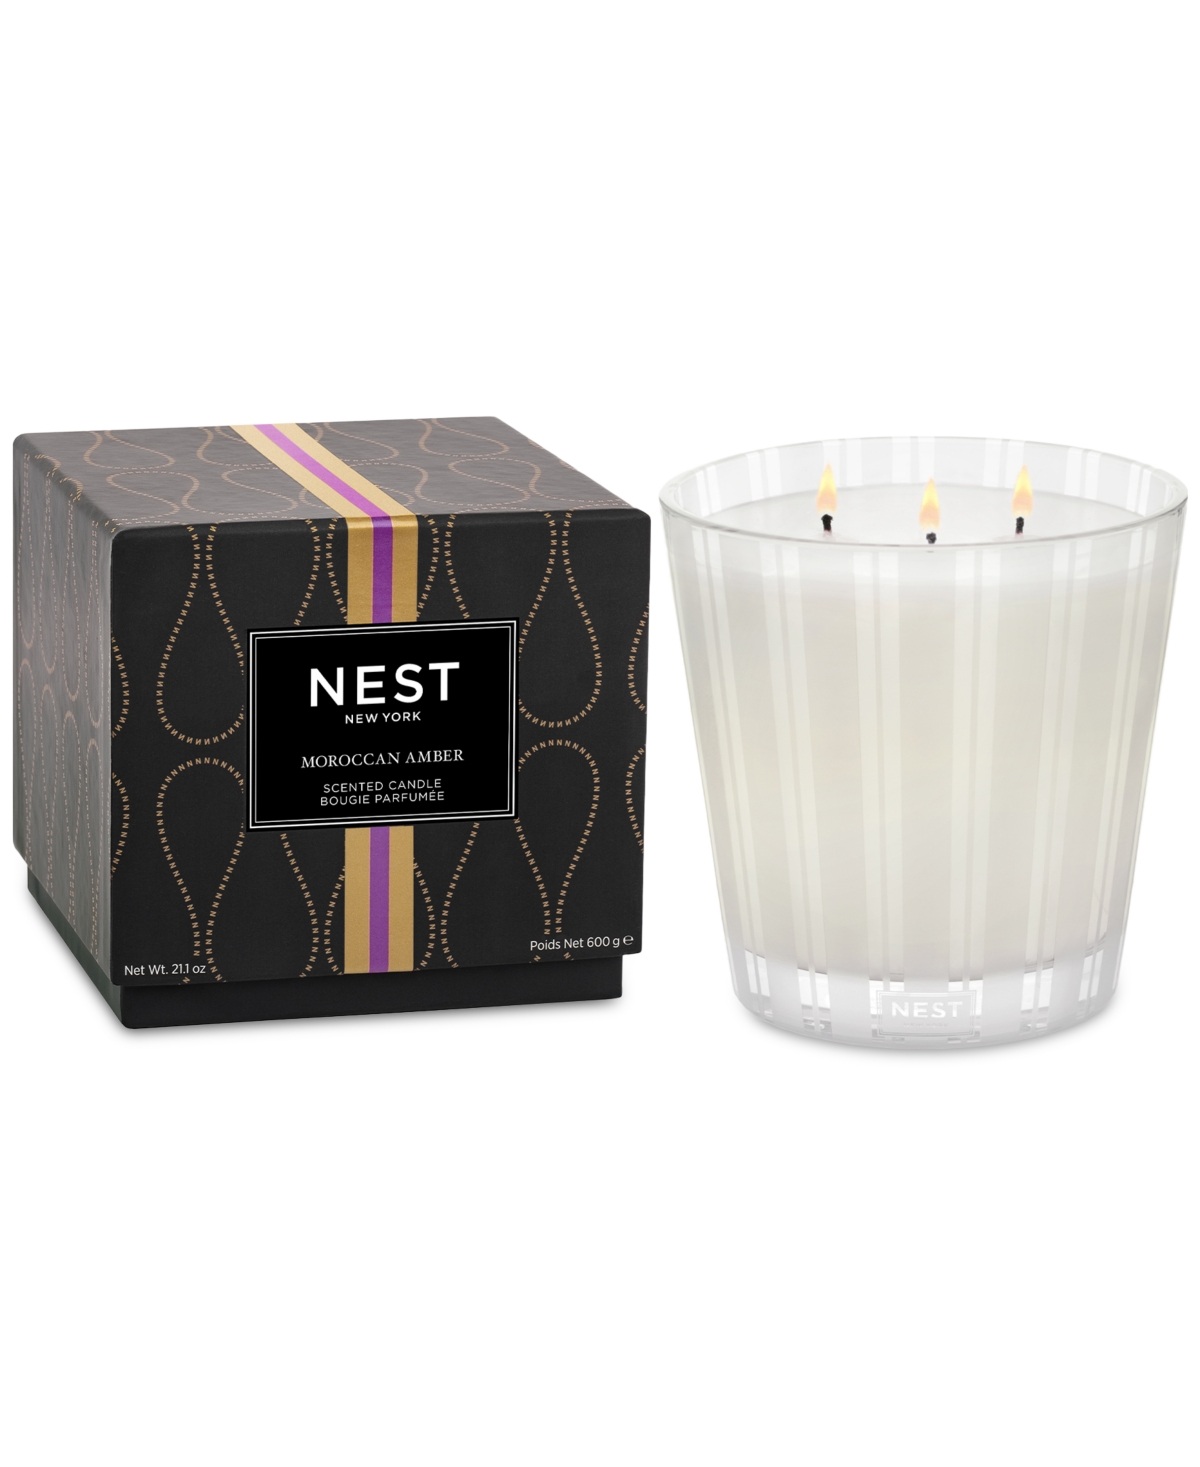 NEST NEW YORK MOROCCAN AMBER 3-WICK CANDLE, 21.1 OZ.